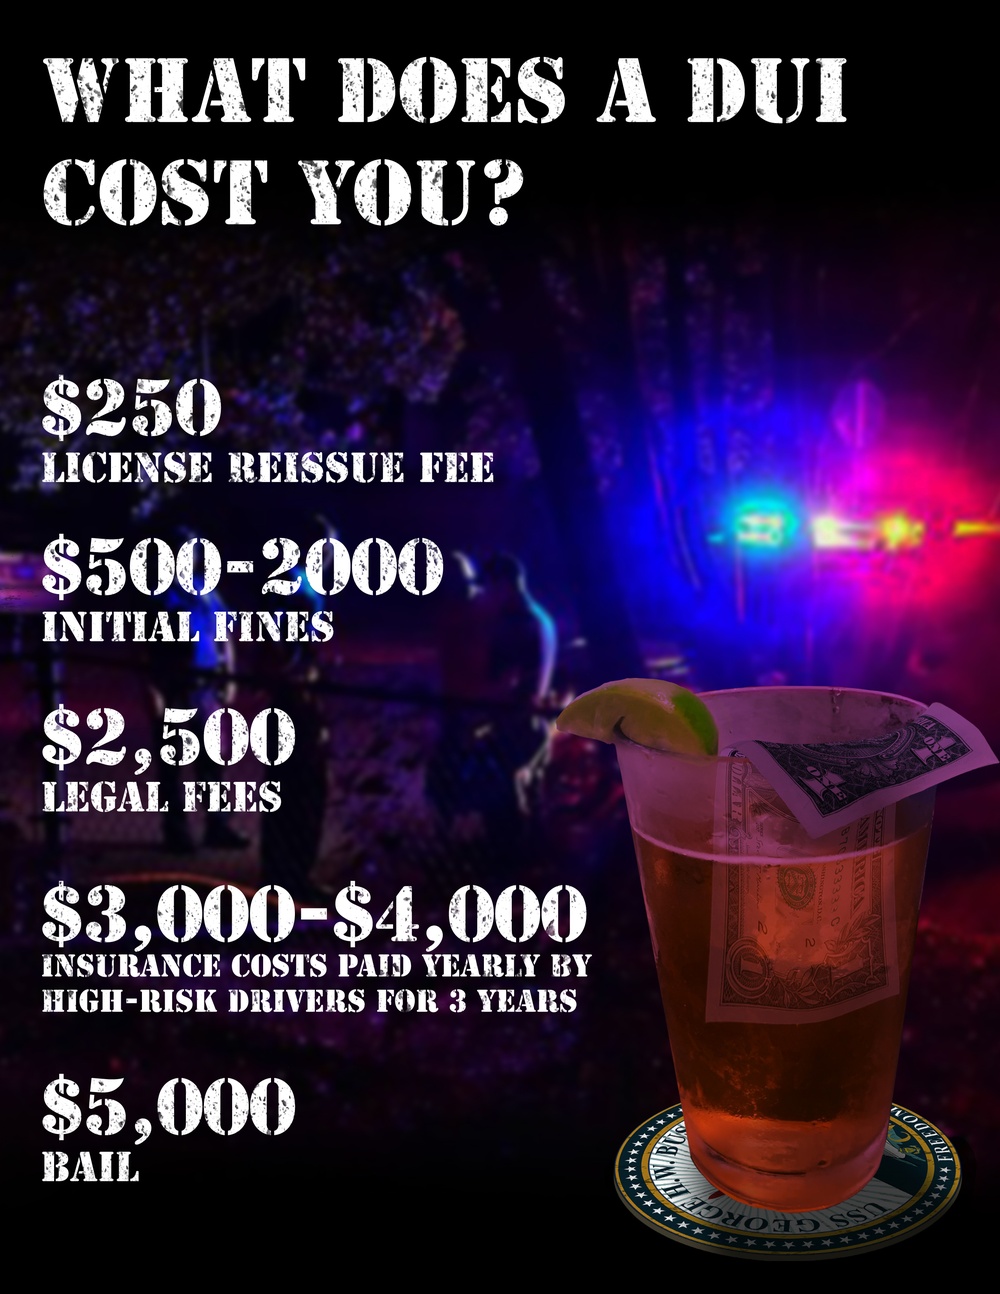 What Does a DUI Cost You?